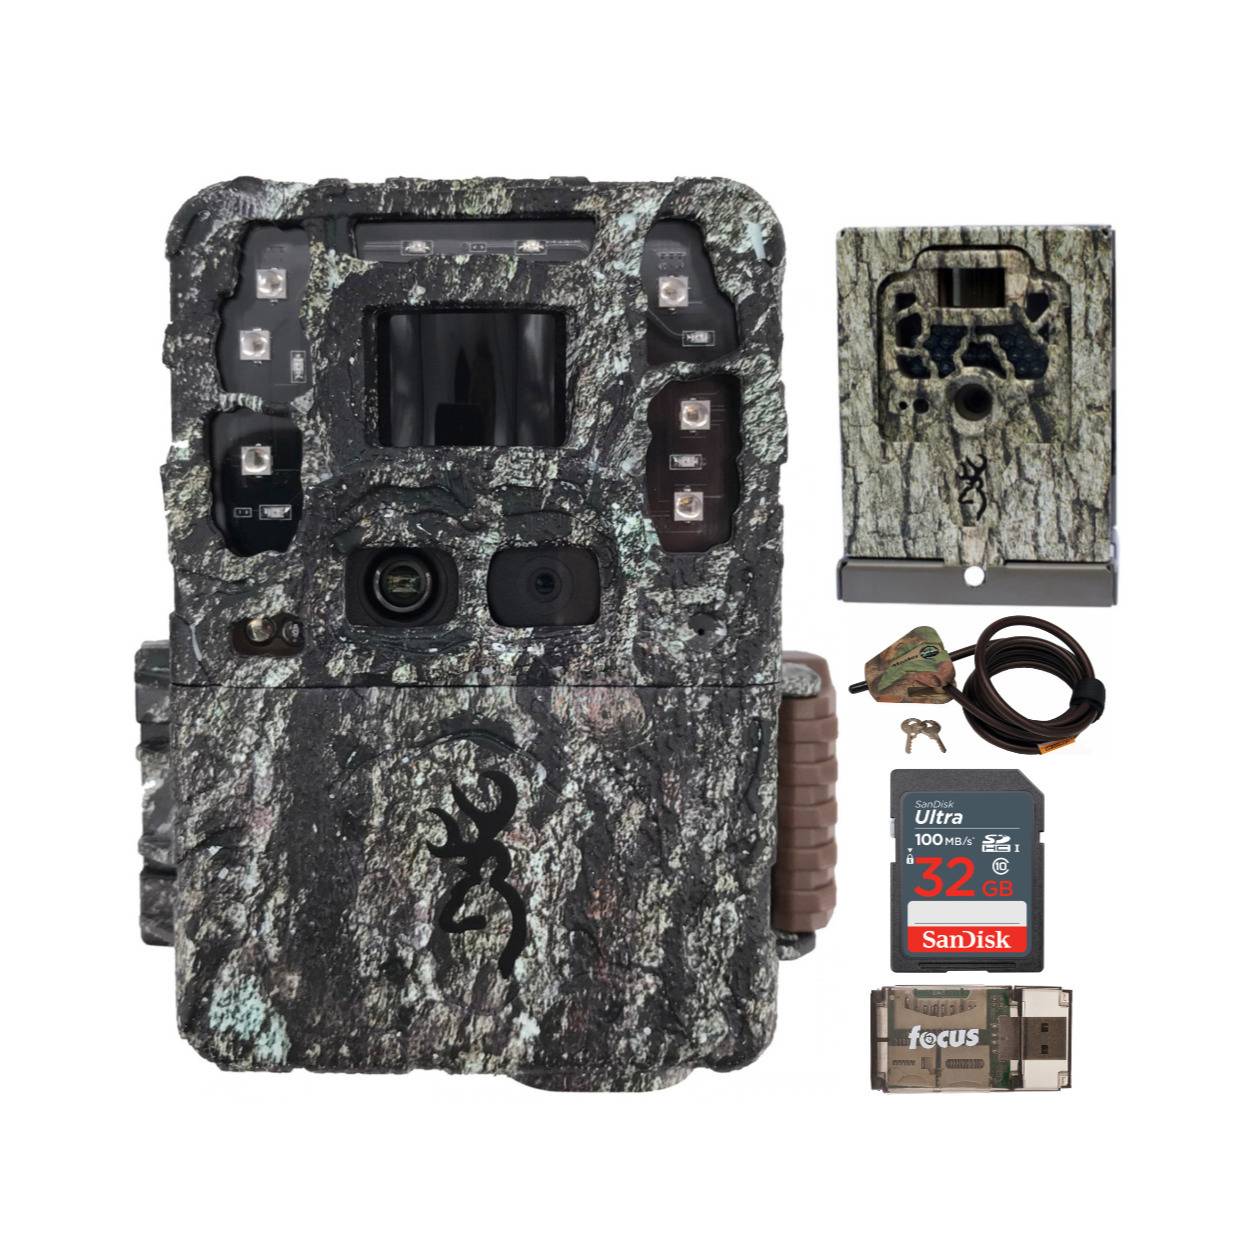 Browning Trail Camera Strike Force Pro DCL with Security Box, Locking Cable, Memory Card Bundle